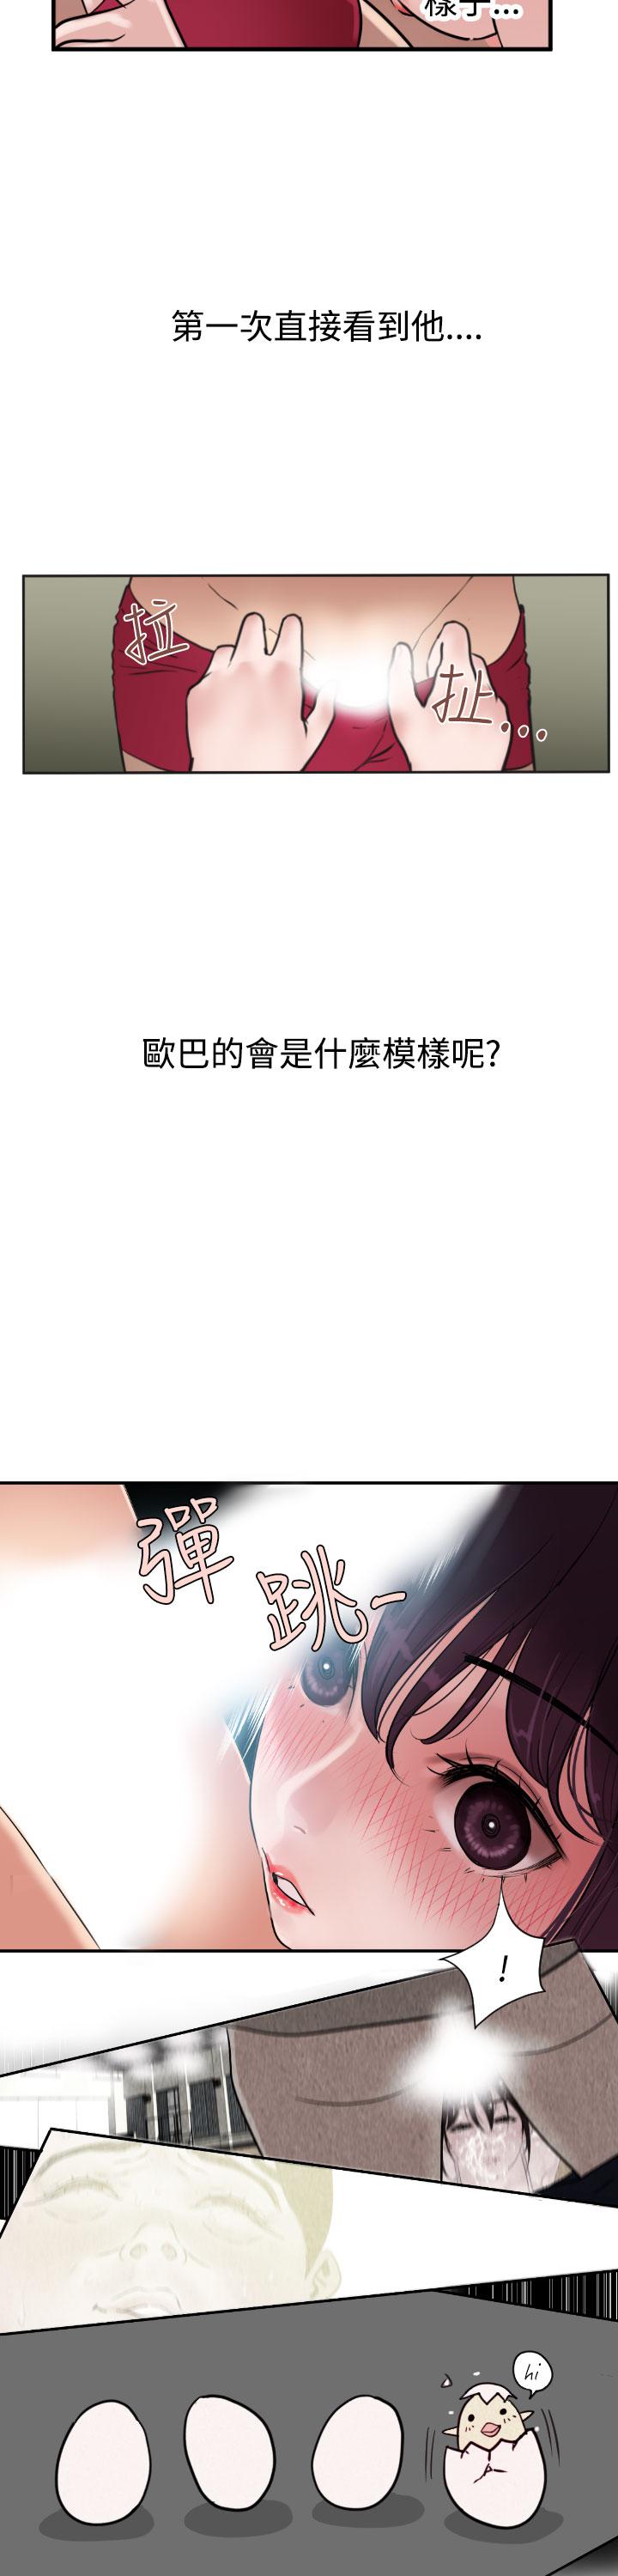 Desire King (慾求王) Ch.1-7 (chinese) 62